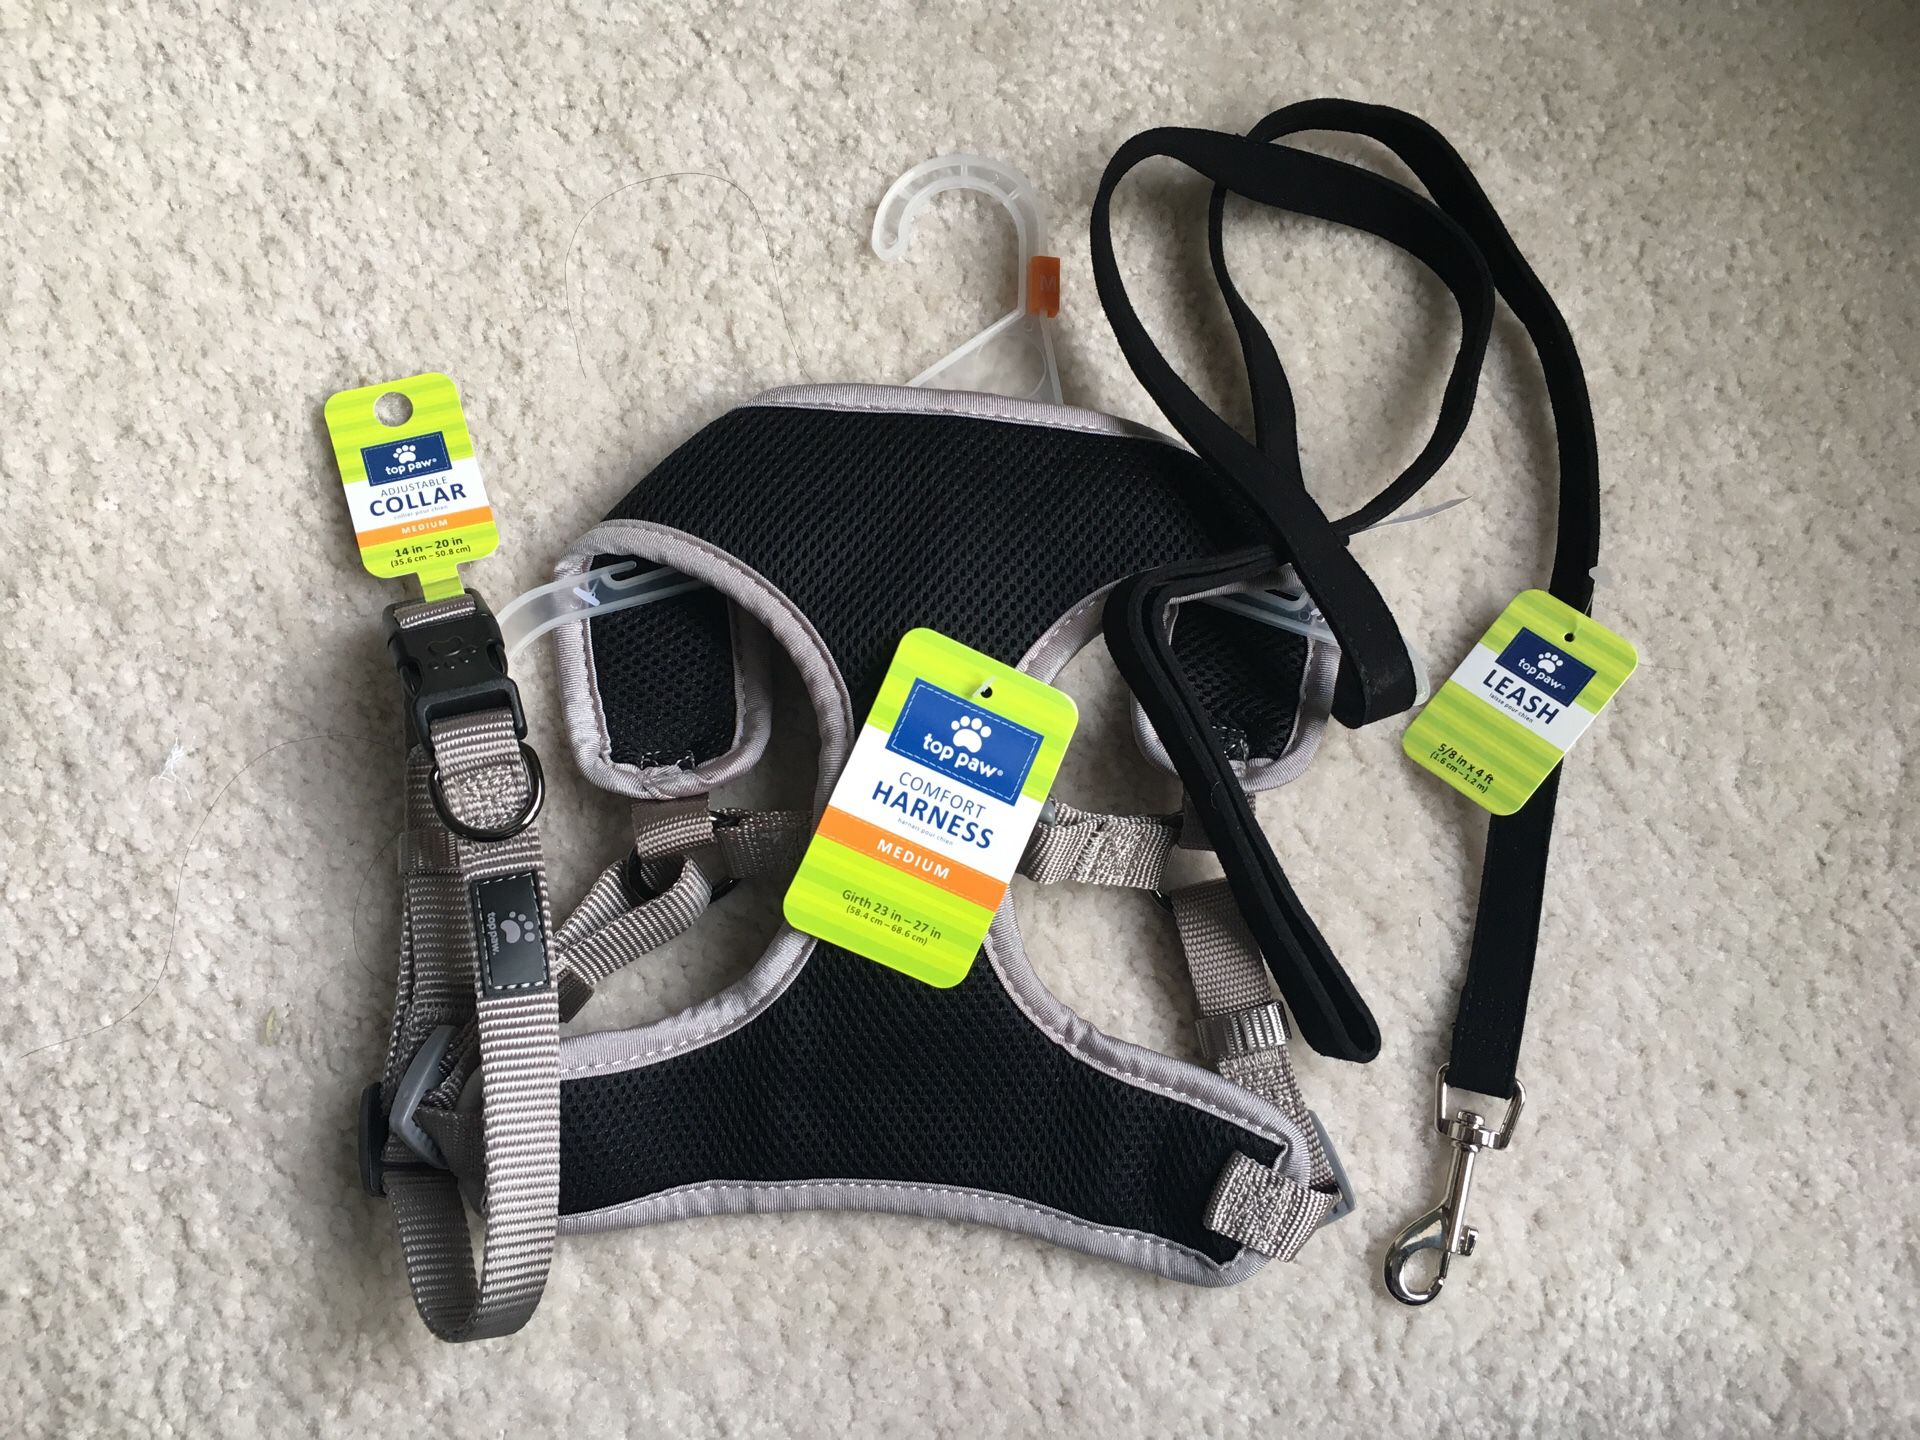 Brand New Top Paw Size Medium Collar, Harness, and Leash Set